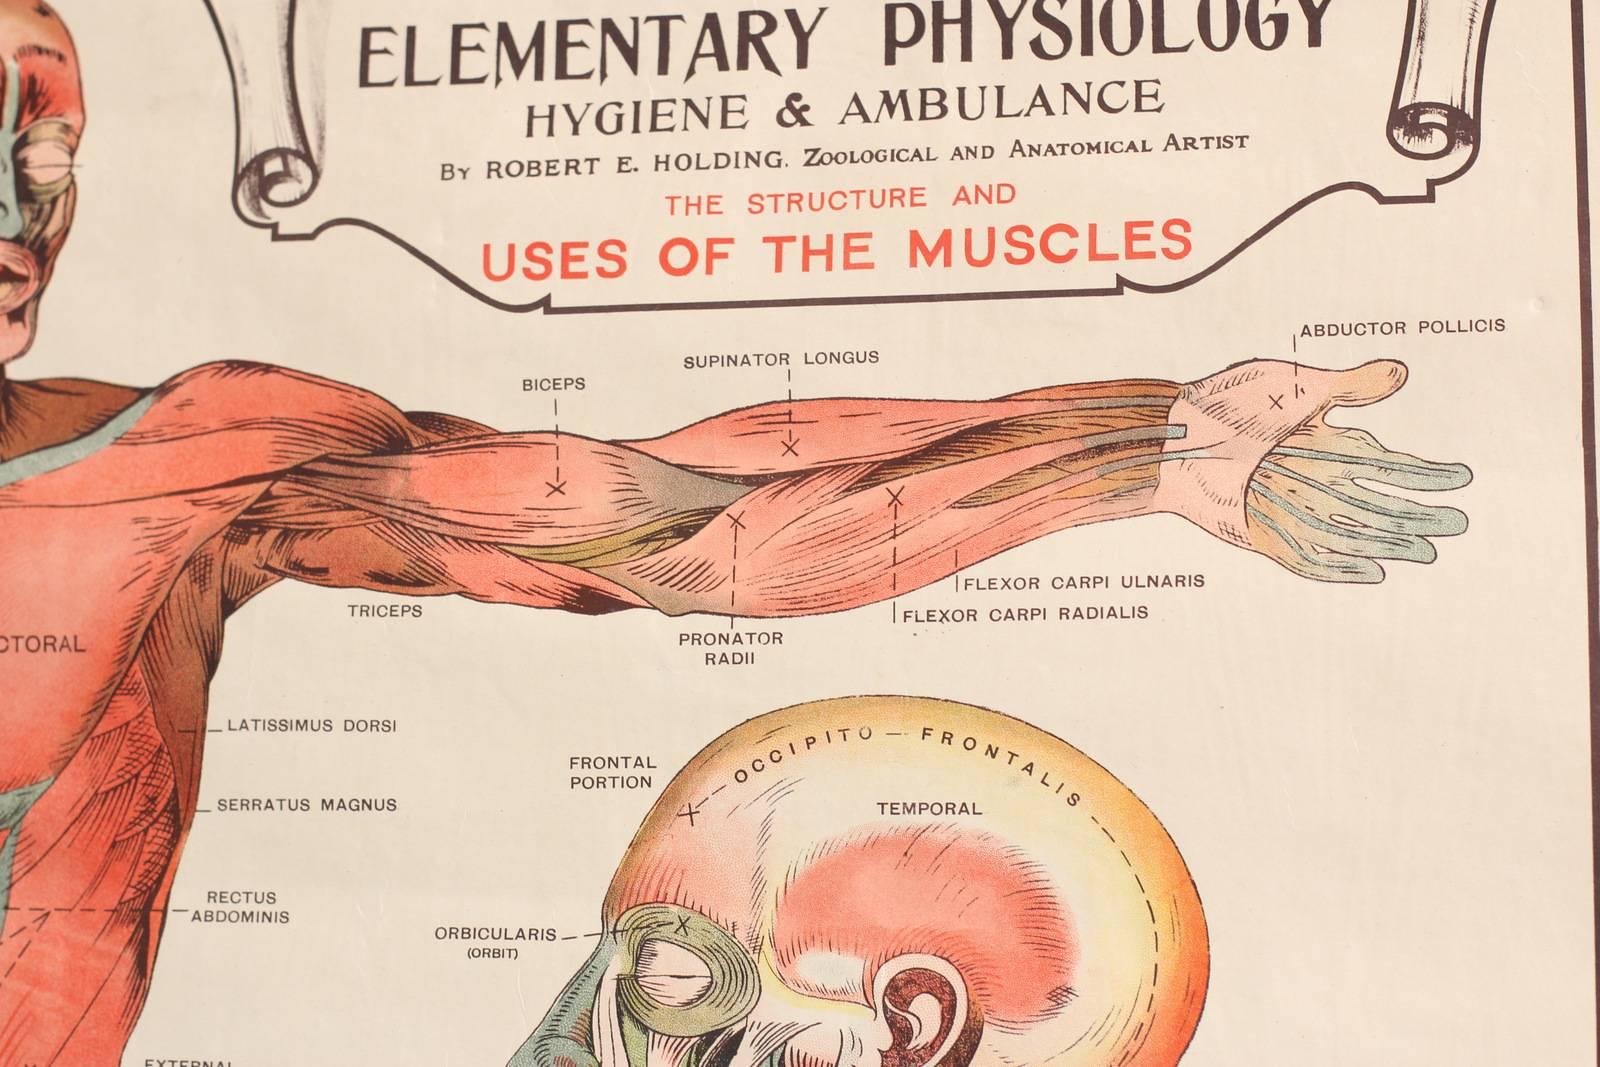 English Anatomical Chart of the Muscles by Robert E Holding, circa 1910